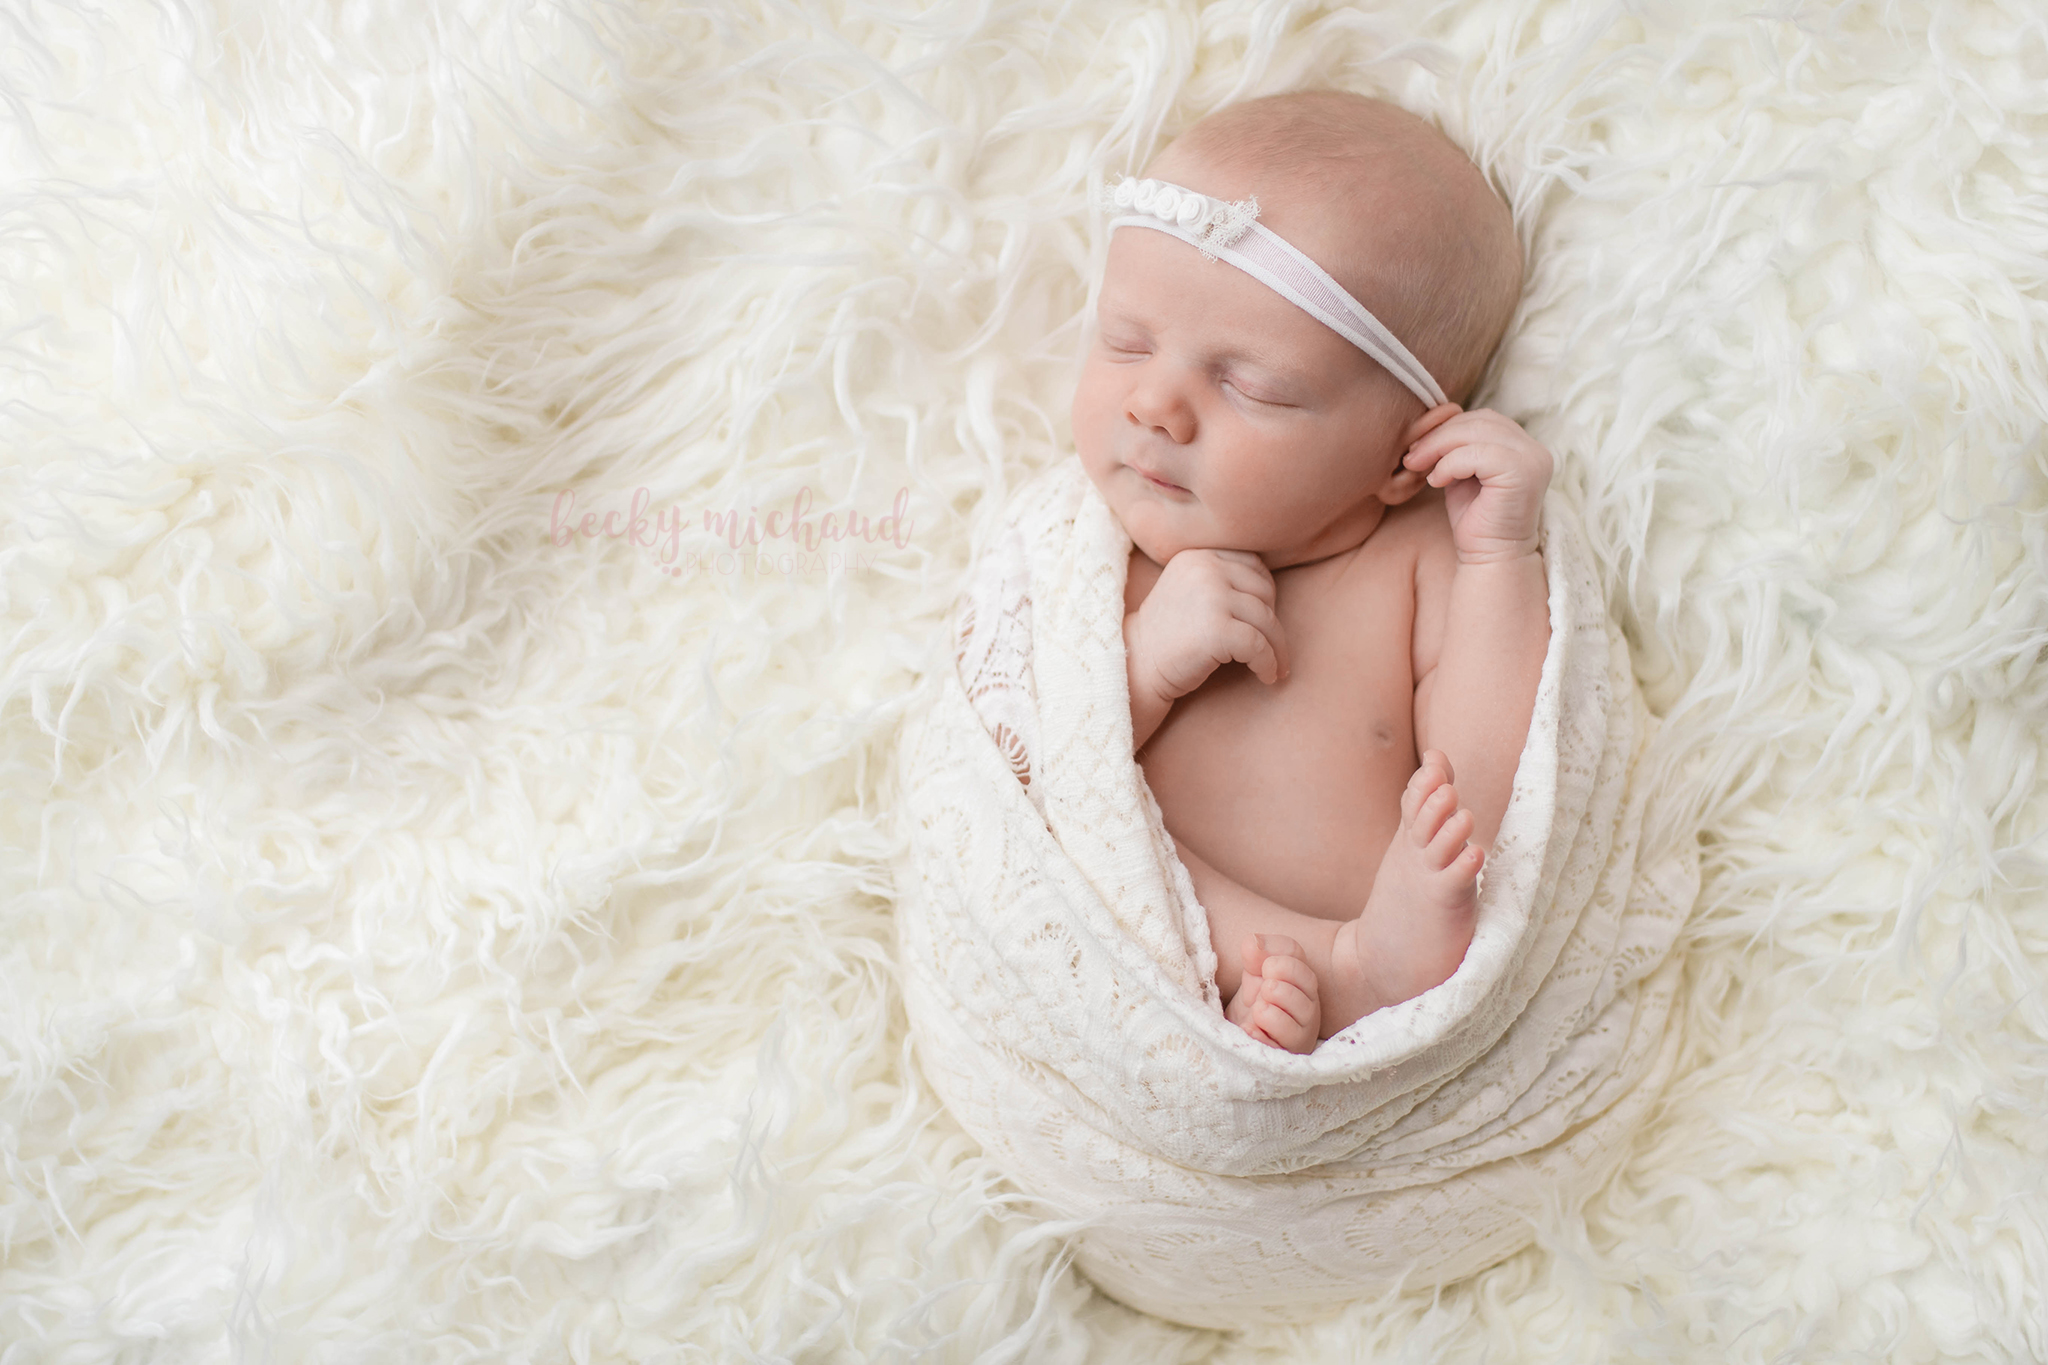 posed newborn photo taken by Becky Michaud, fort collins photographer